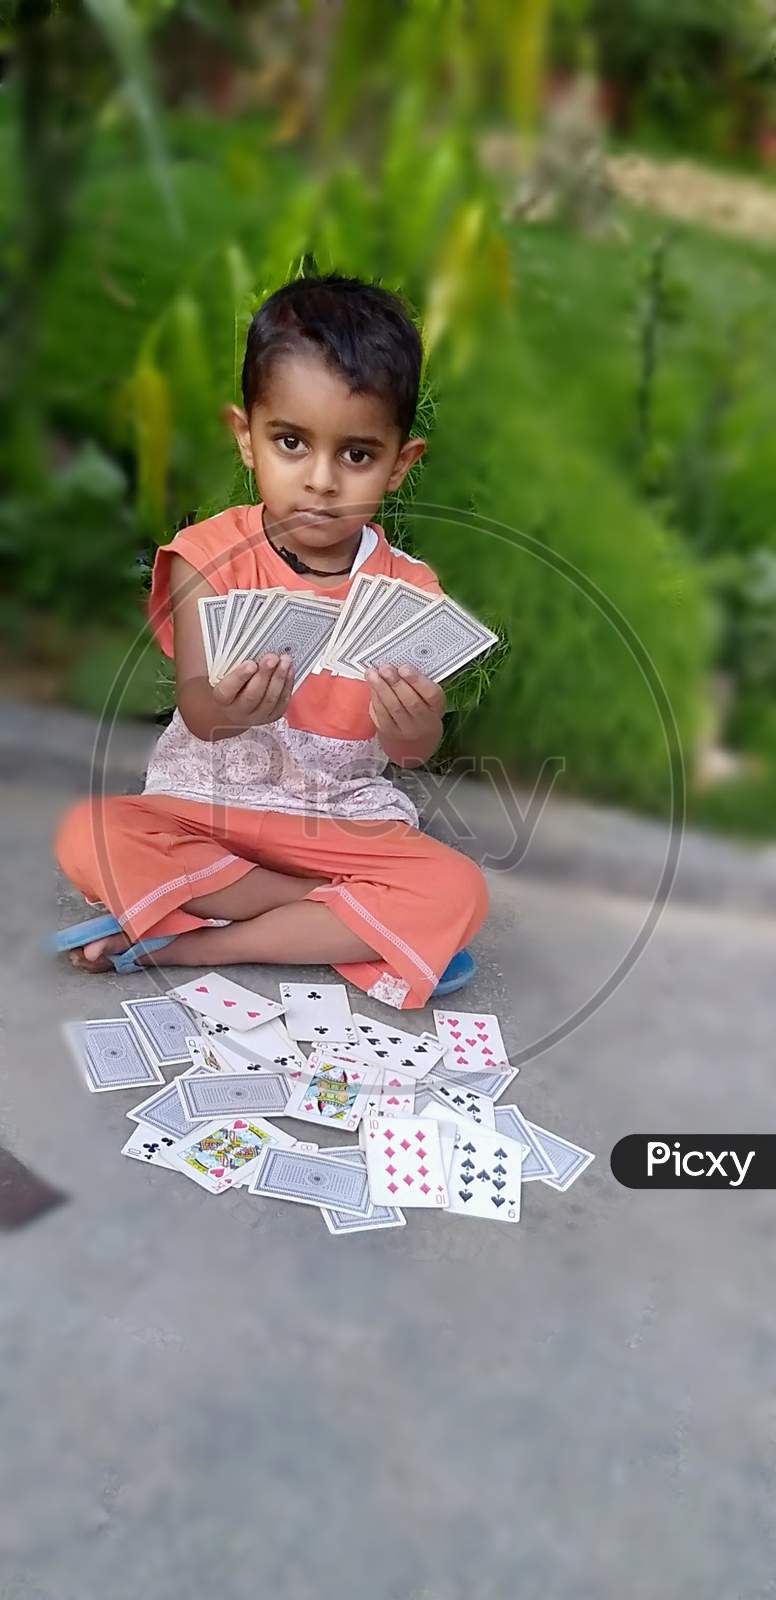 A baby people played by CARDS in downs